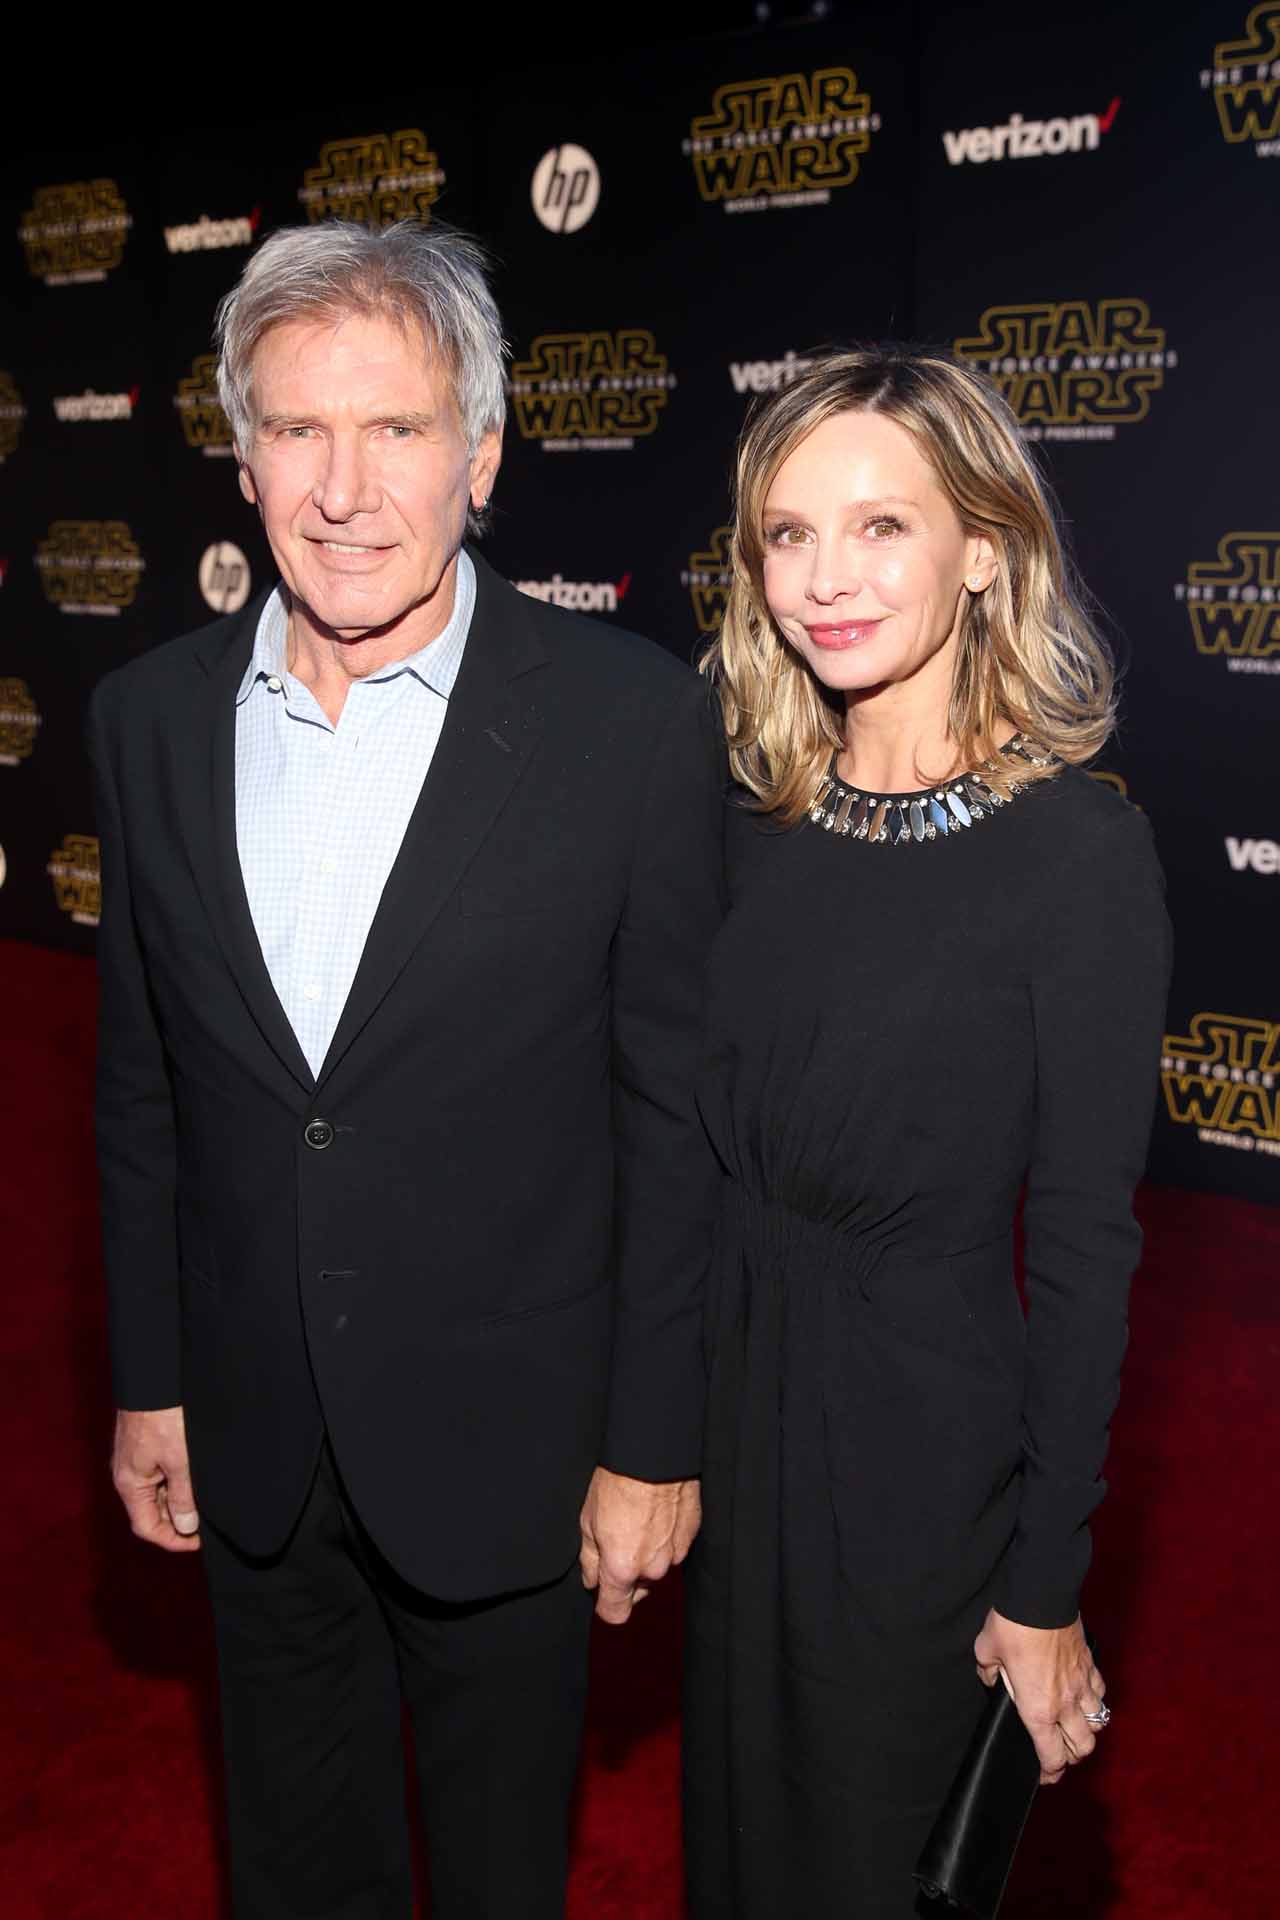 HOLLYWOOD, CA - DECEMBER 14:  Actors Harrison Ford (L) and Calista Flockhart attend the World Premiere of ?Star Wars: The Force Awakens? at the Dolby, El Capitan, and TCL Theatres on December 14, 2015 in Hollywood, California.  (Photo by Jesse Grant/Getty Images for Disney) *** Local Caption *** Harrison Ford;Calista Flockhart